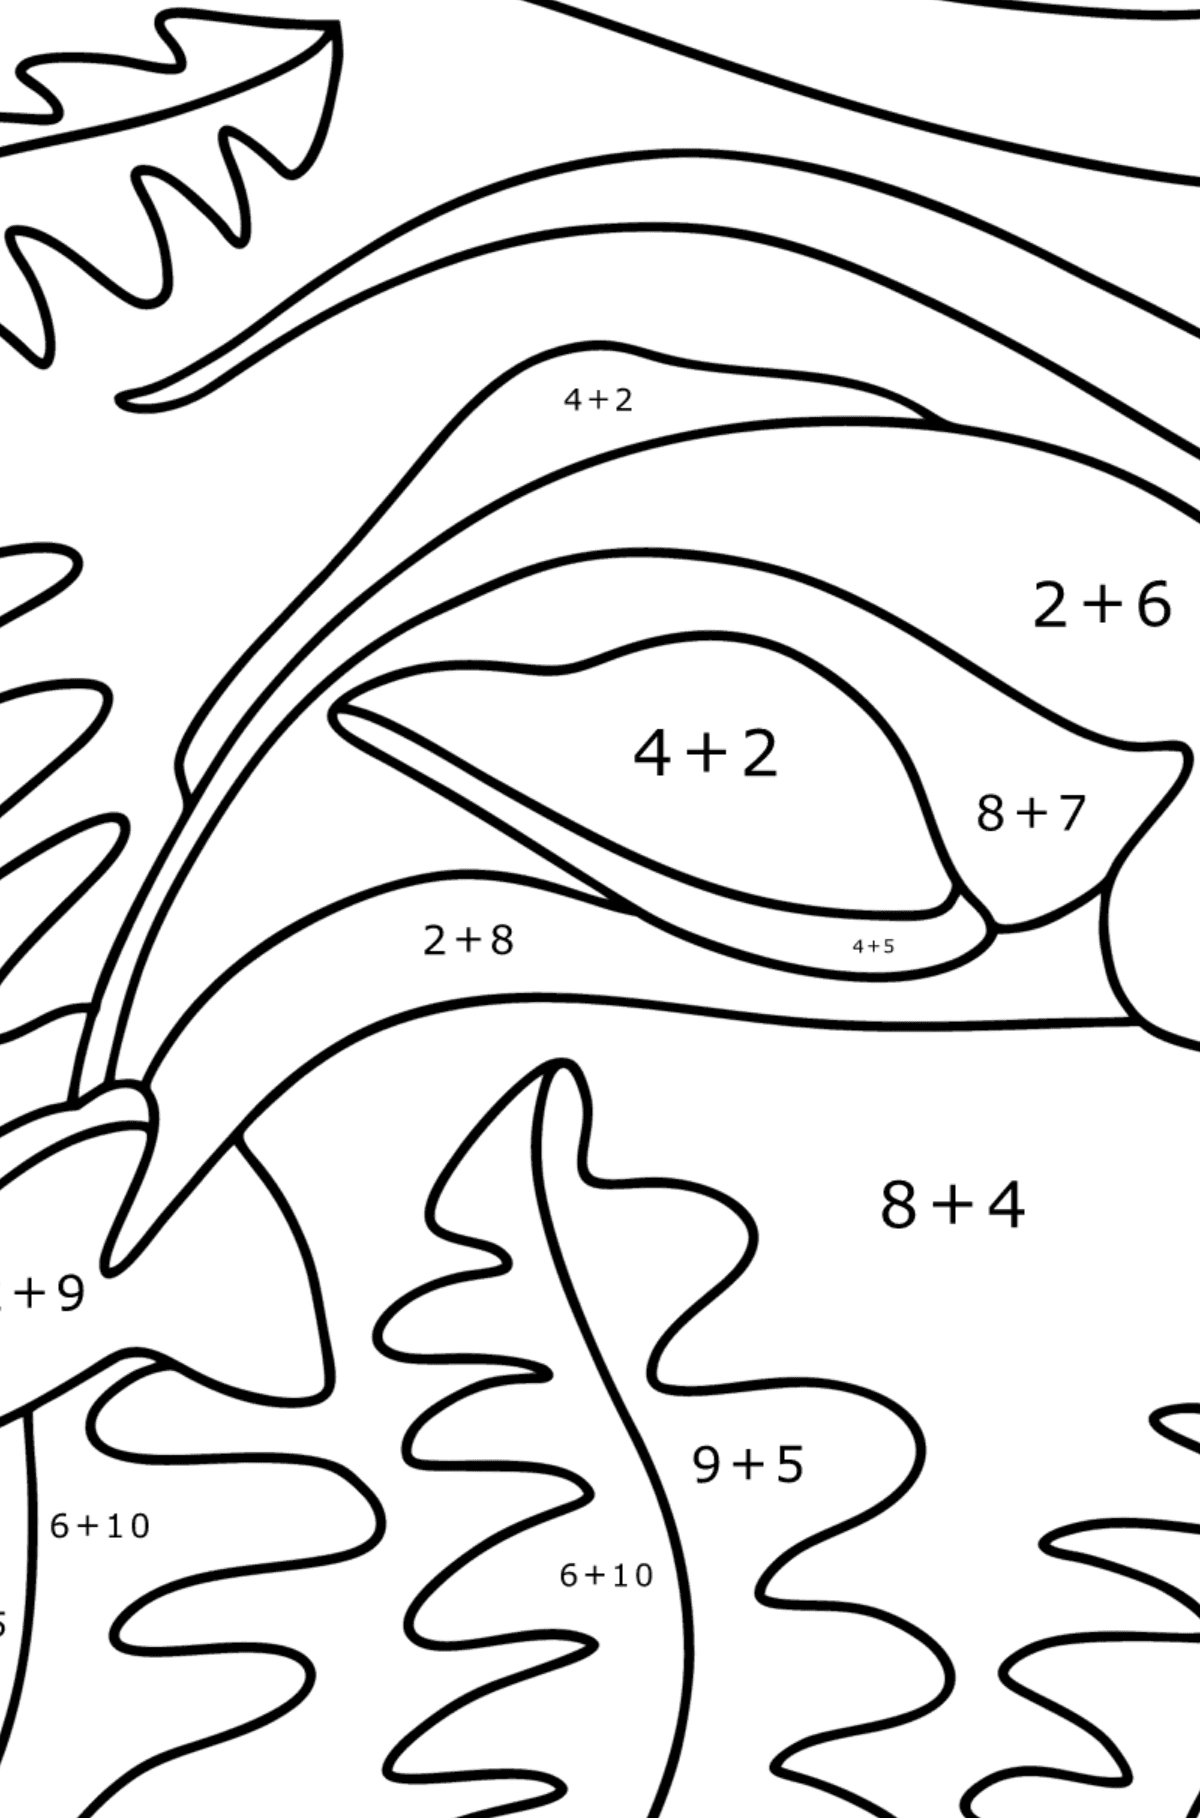 Chinese River Dolphin coloring page - Math Coloring - Addition for Kids